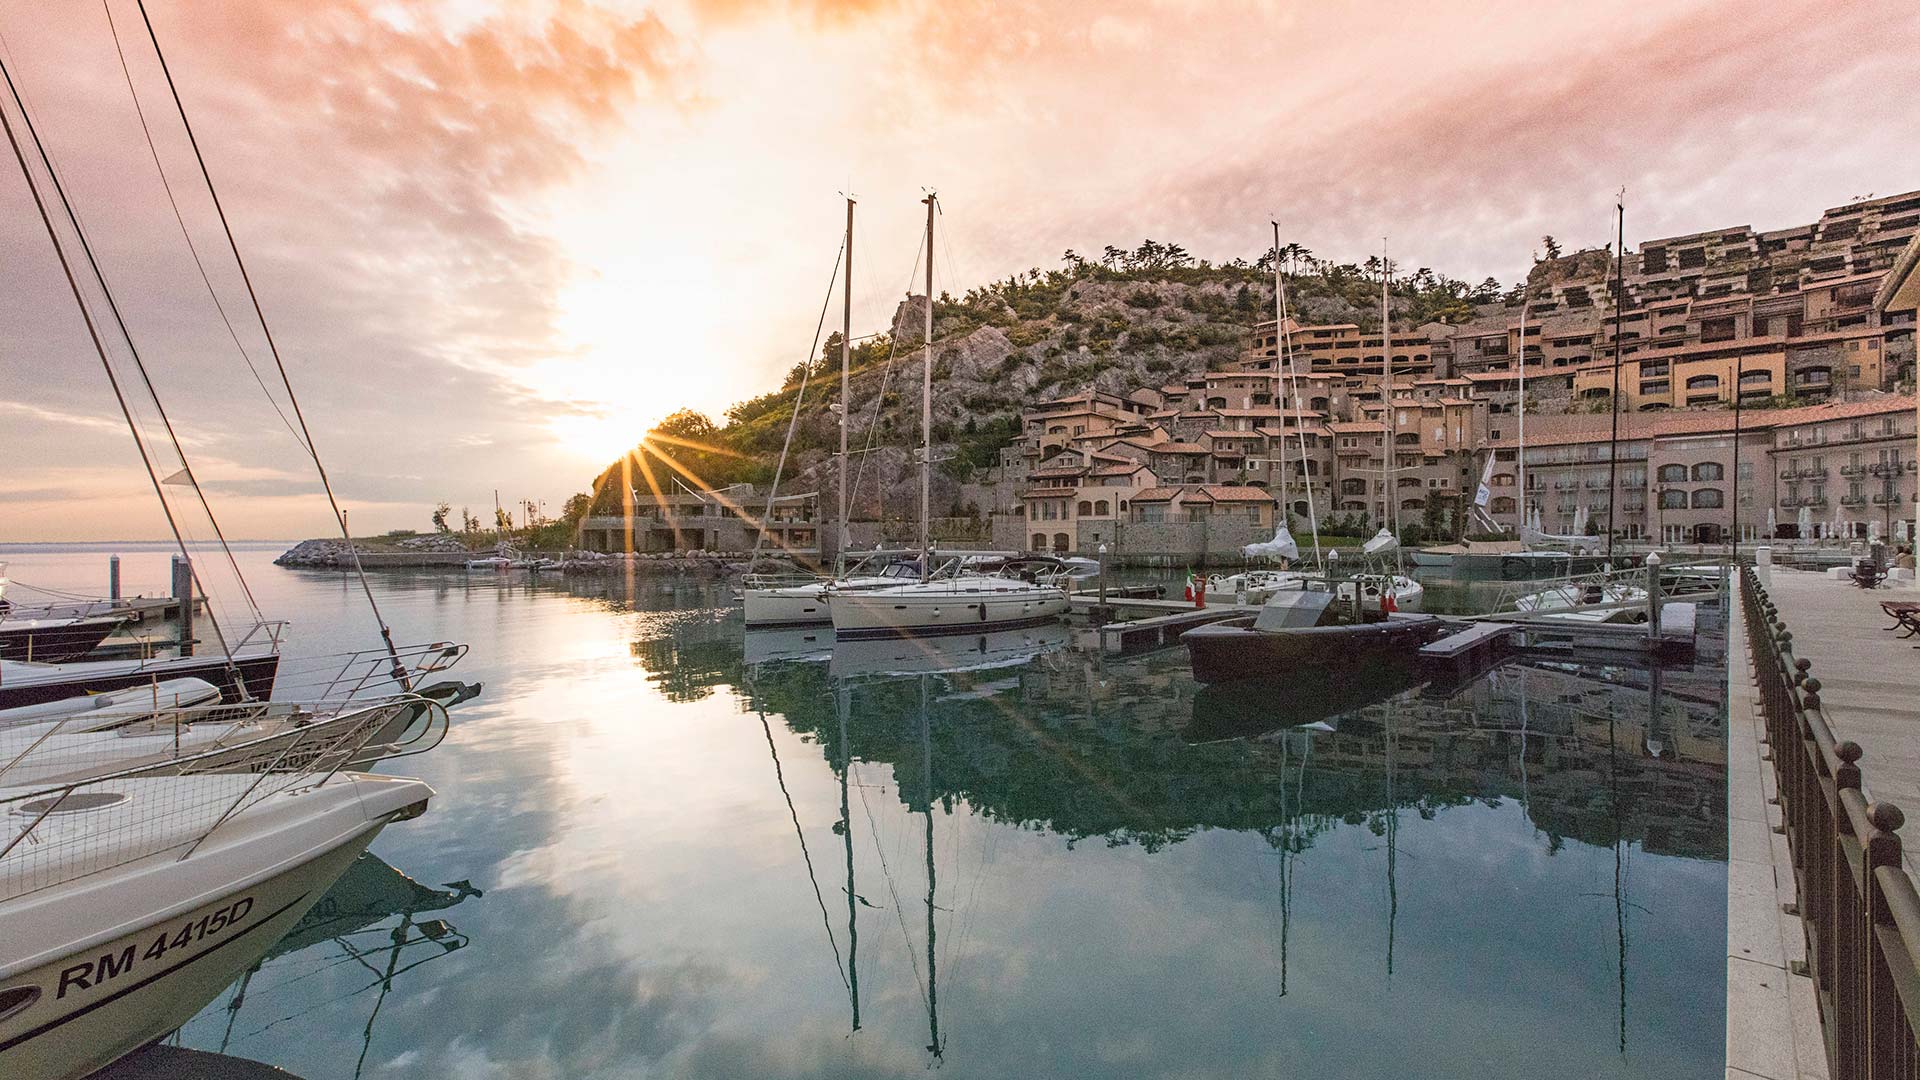 The sun setting behind a rocky hill in Portopiccolo, Italy with sailboats and crystal clear water in the foreground.